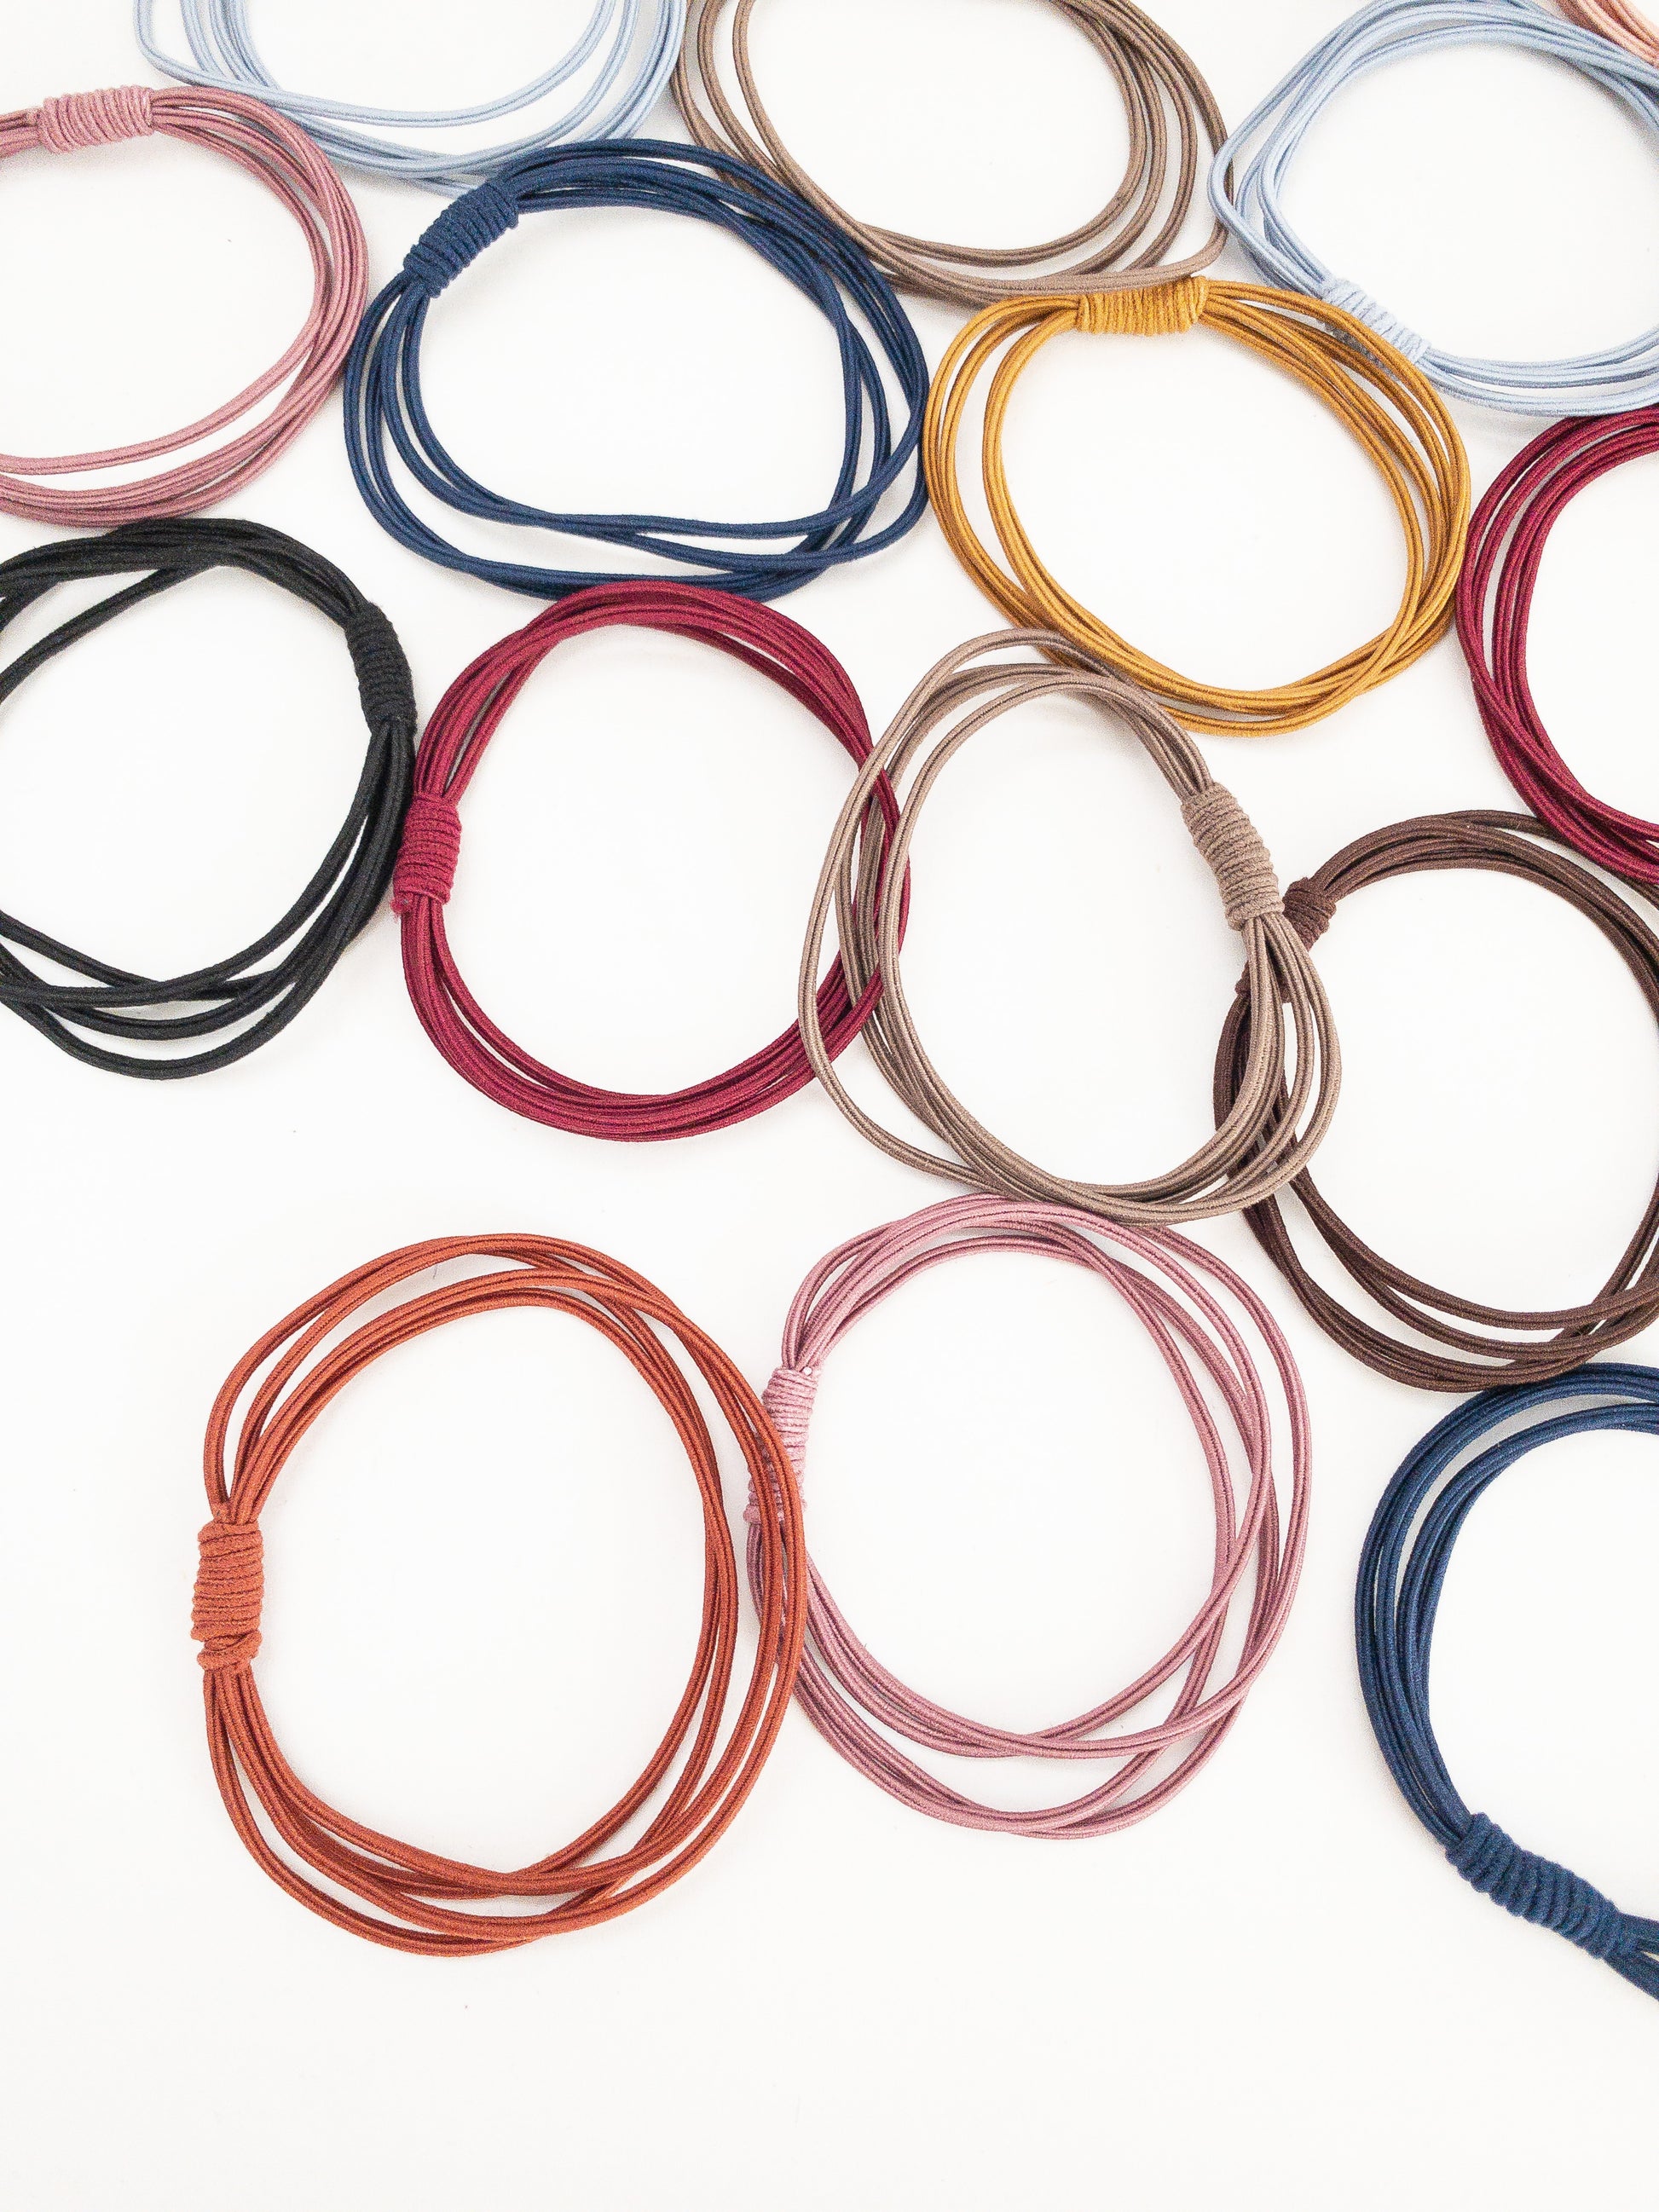 A much needed set of 20 hair ties! Each hair tie has four strands wrapped around and tied with a pretty coil. There are two of each color: black, plum, mustard, light pink, navy, dark brown, mauve, light blue, gray, and copper. Korean hair ties, Korean hair accessories, Korean accessories, Korean hair rubber bands